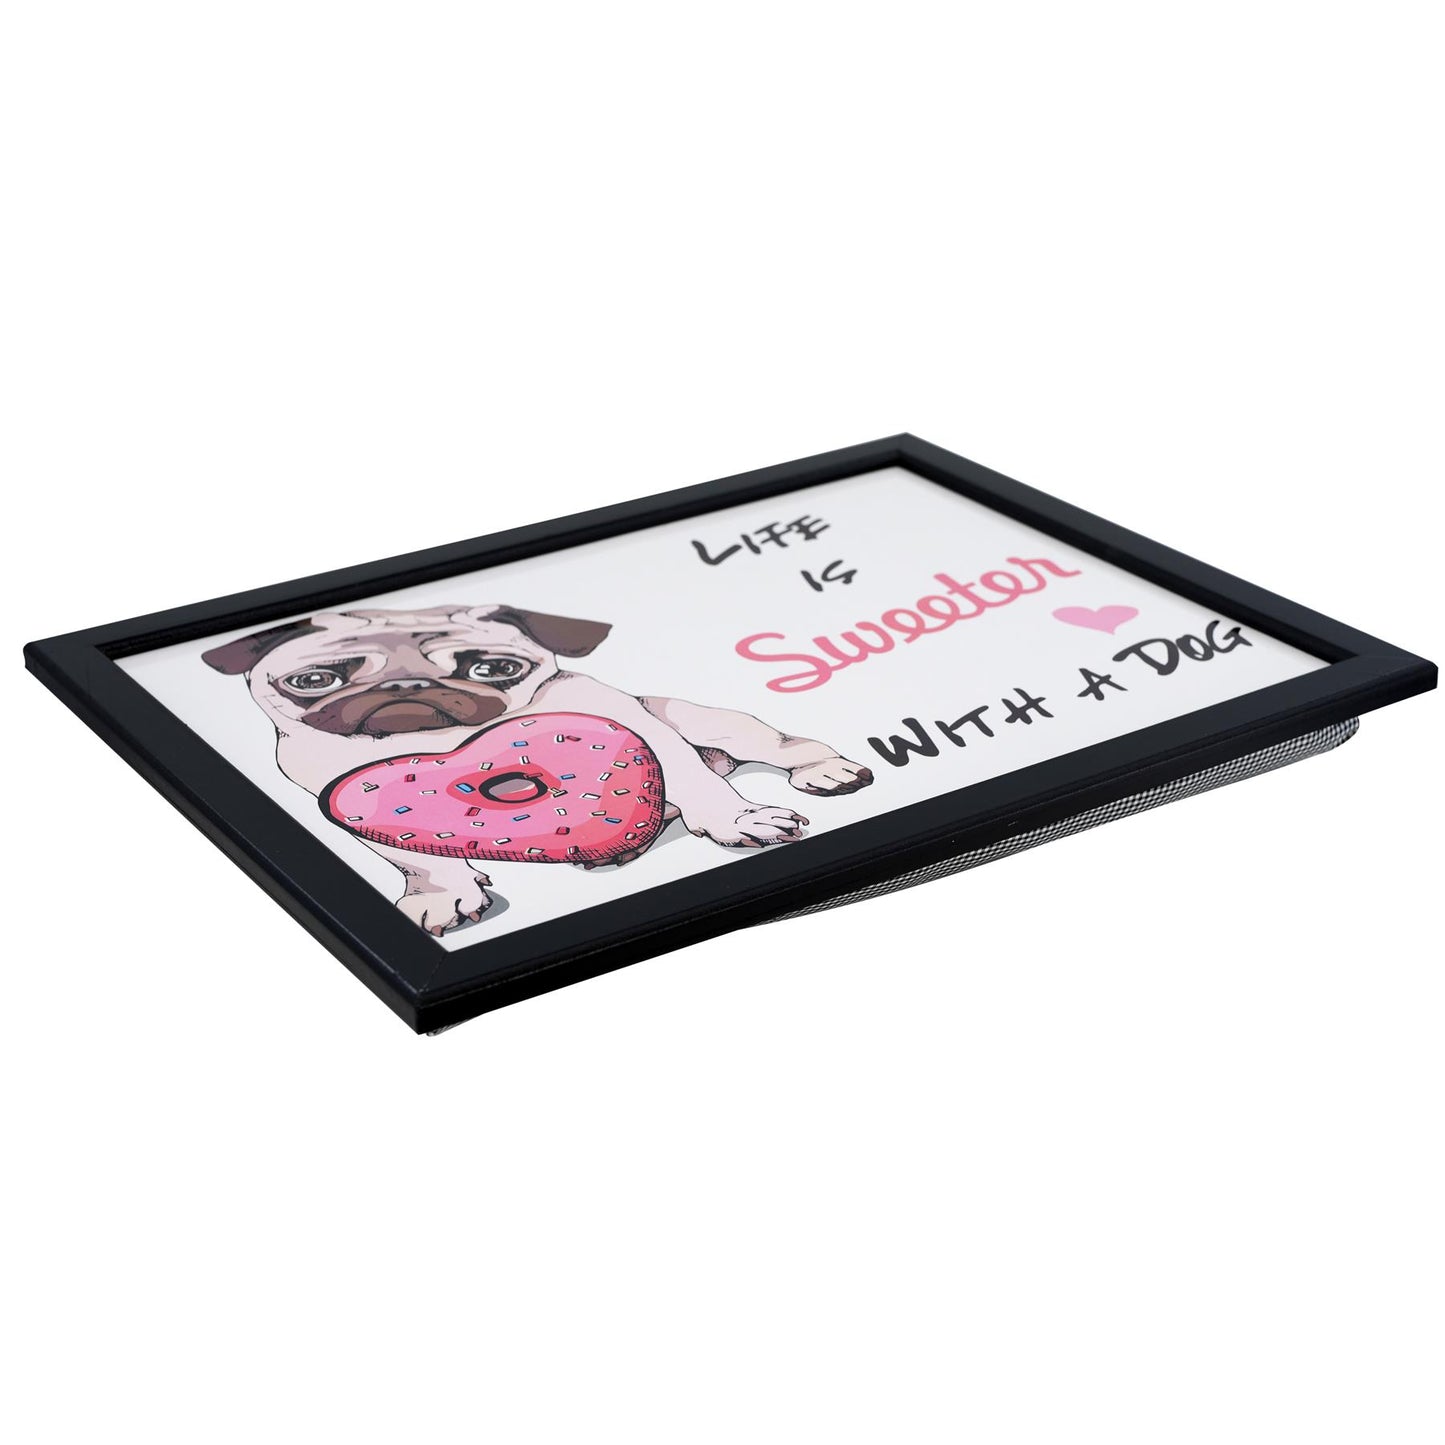 Pug Design lap Tray With Bean Bag Cushion by Geezy - UKBuyZone